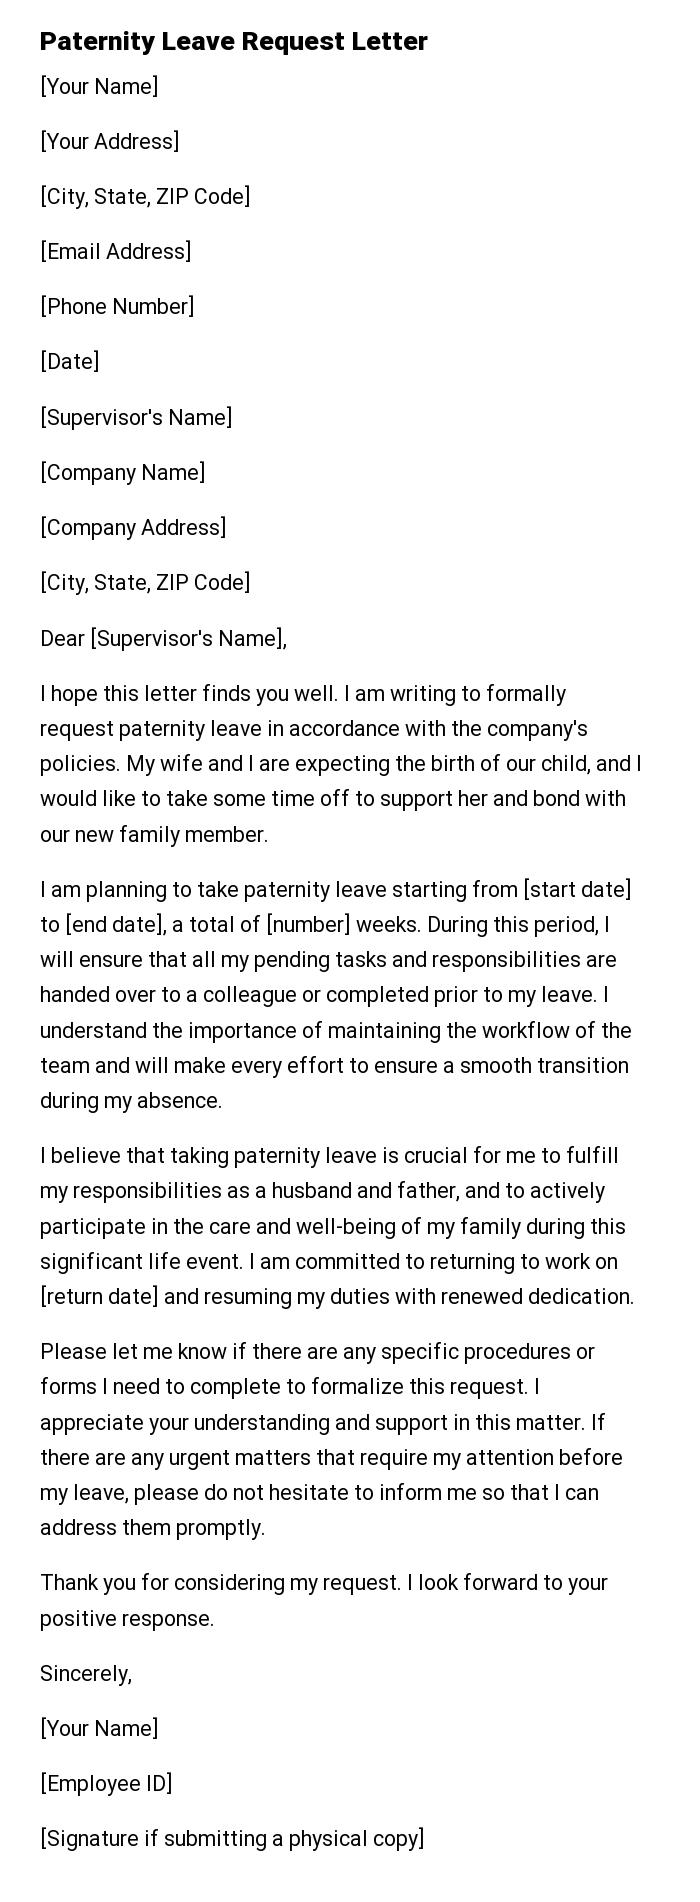 Paternity Leave Request Letter